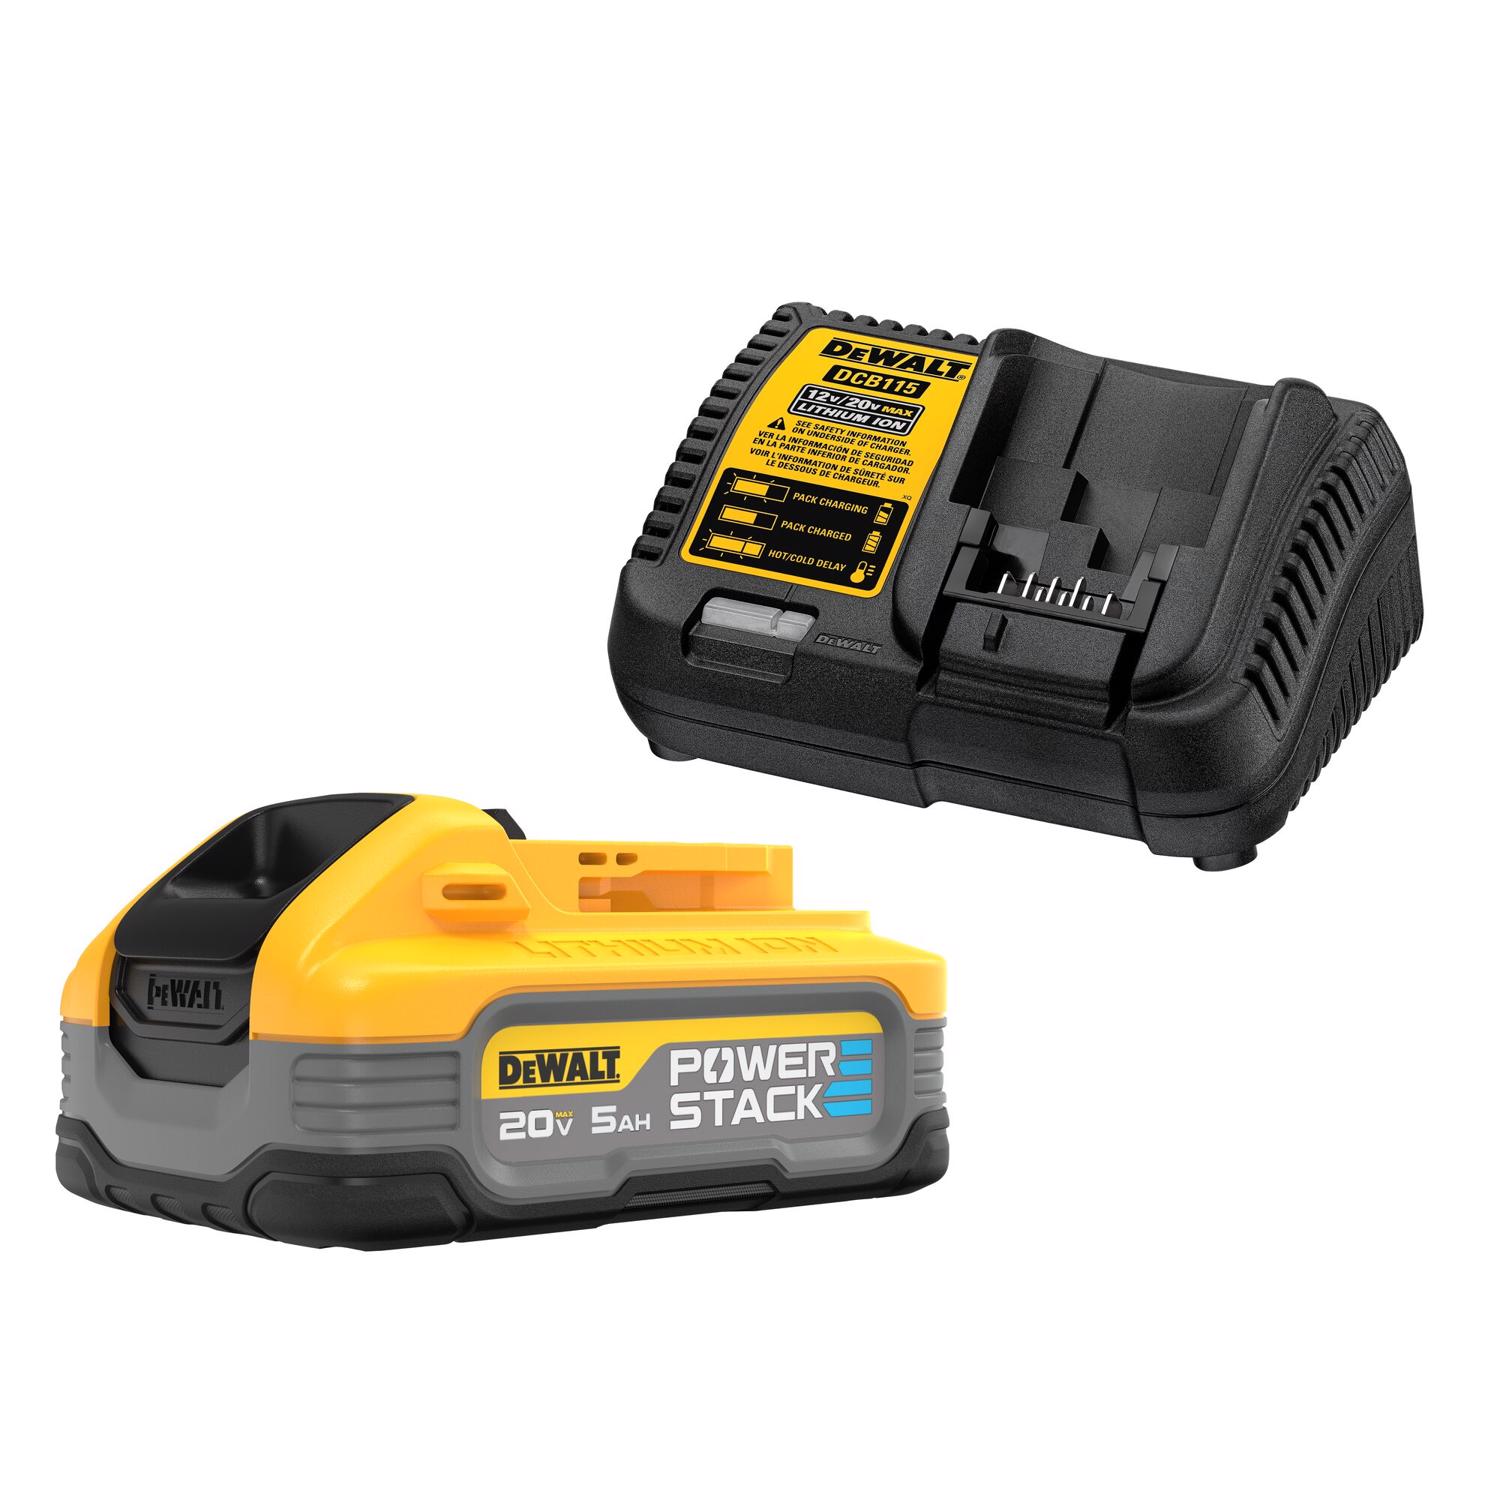 Photos - Power Tool Battery DeWALT 20V MAX POWERSTACK DCBP520C 5 Ah Lithium-Ion Battery and Charger St 